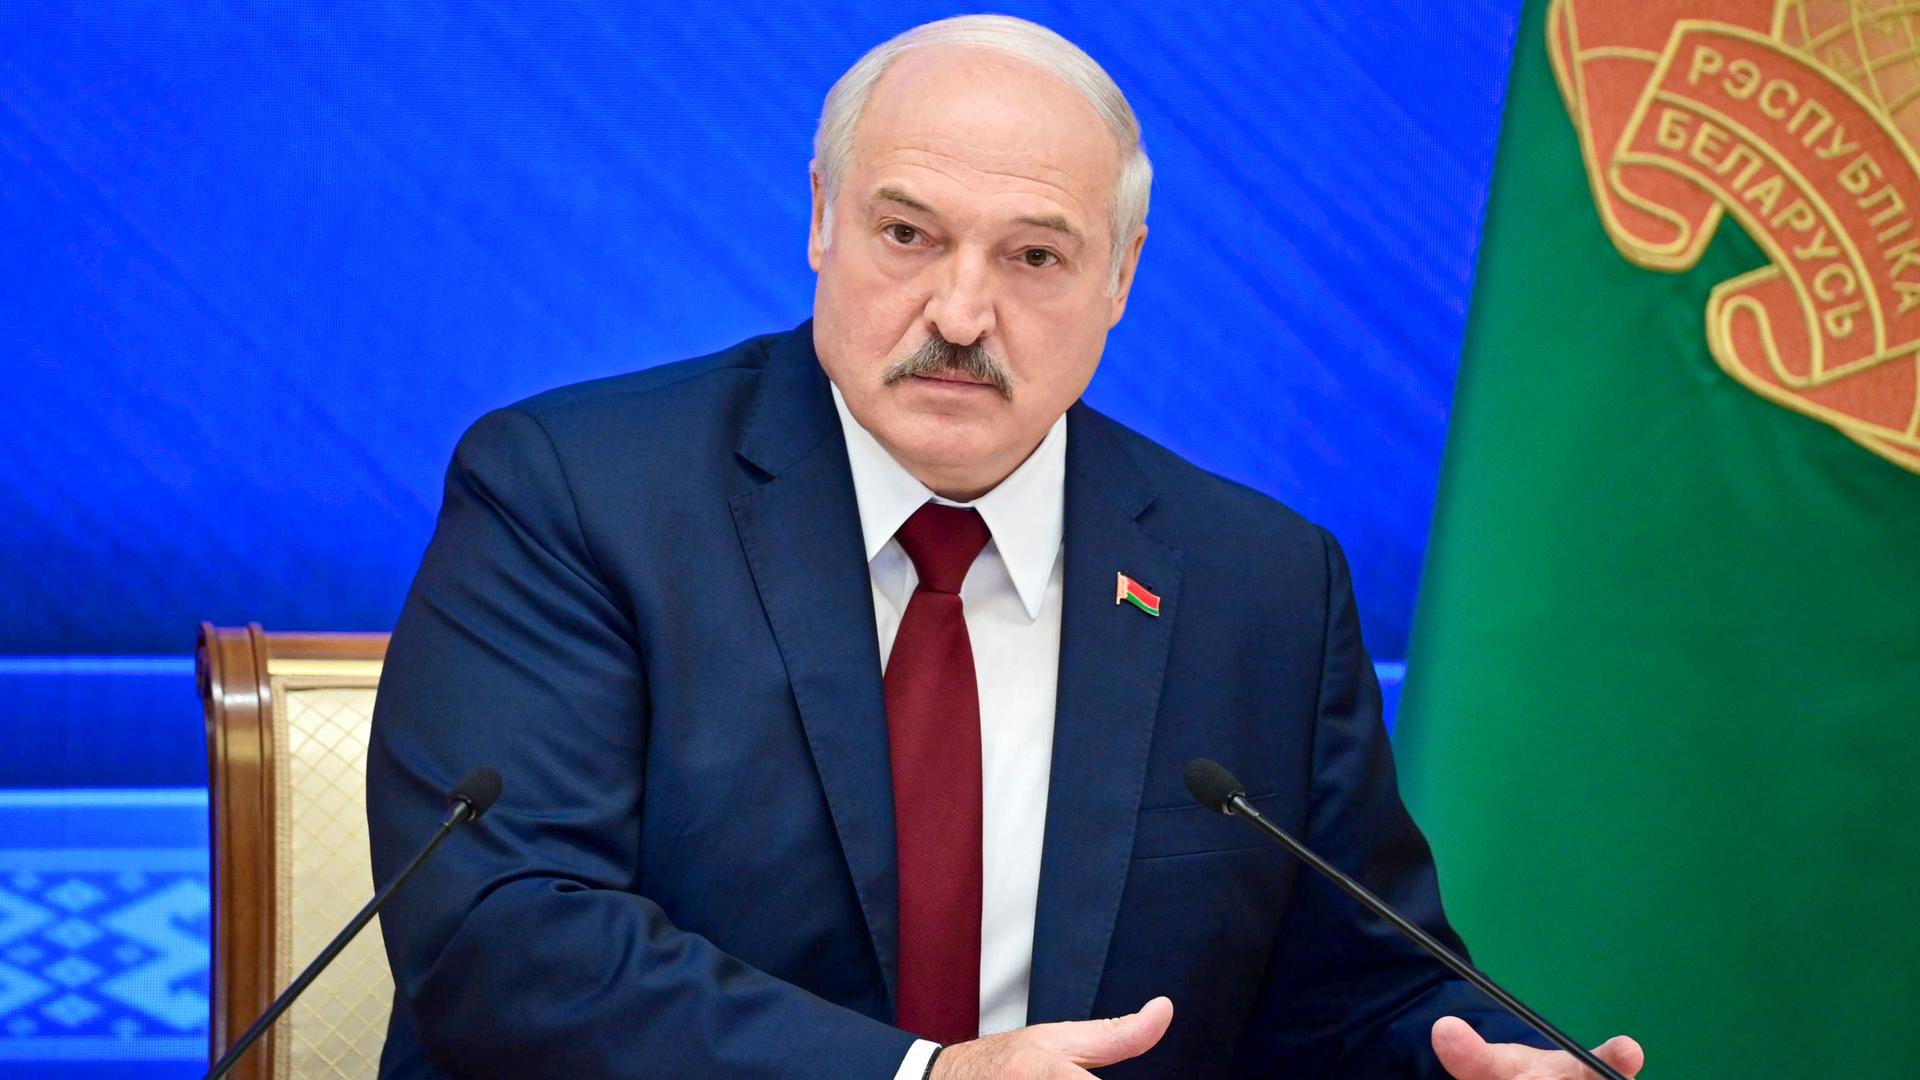 Belarusian President Alexander Lukashenko is shown sitting while wearing a blue suit jacket with a red tie.